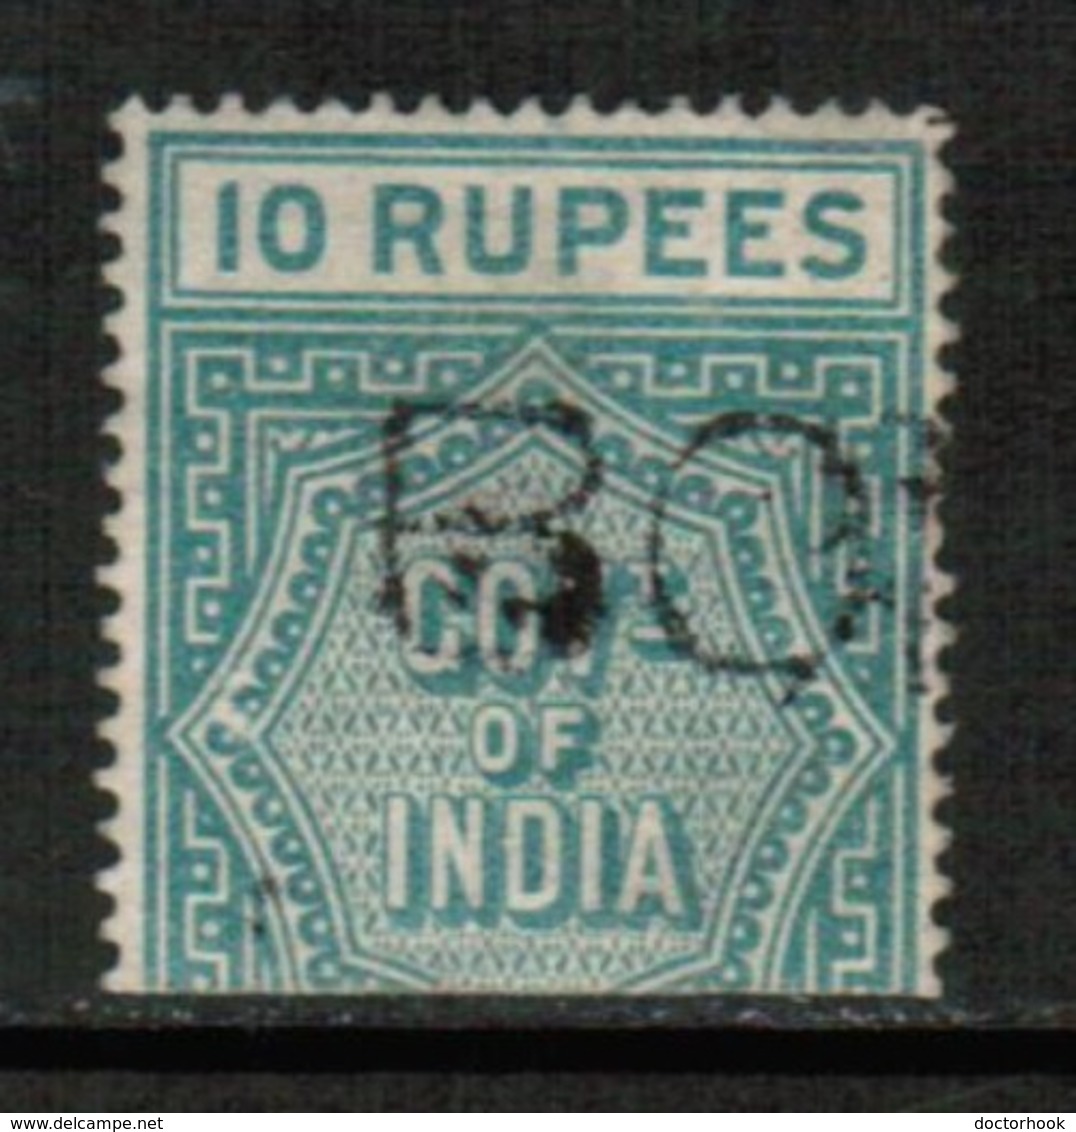 INDIA  Scott # UNLISTED 10 RUPEE Telegraph Stamp USED "AS IS" (Stamp Scan # 426) - 1858-79 Crown Colony